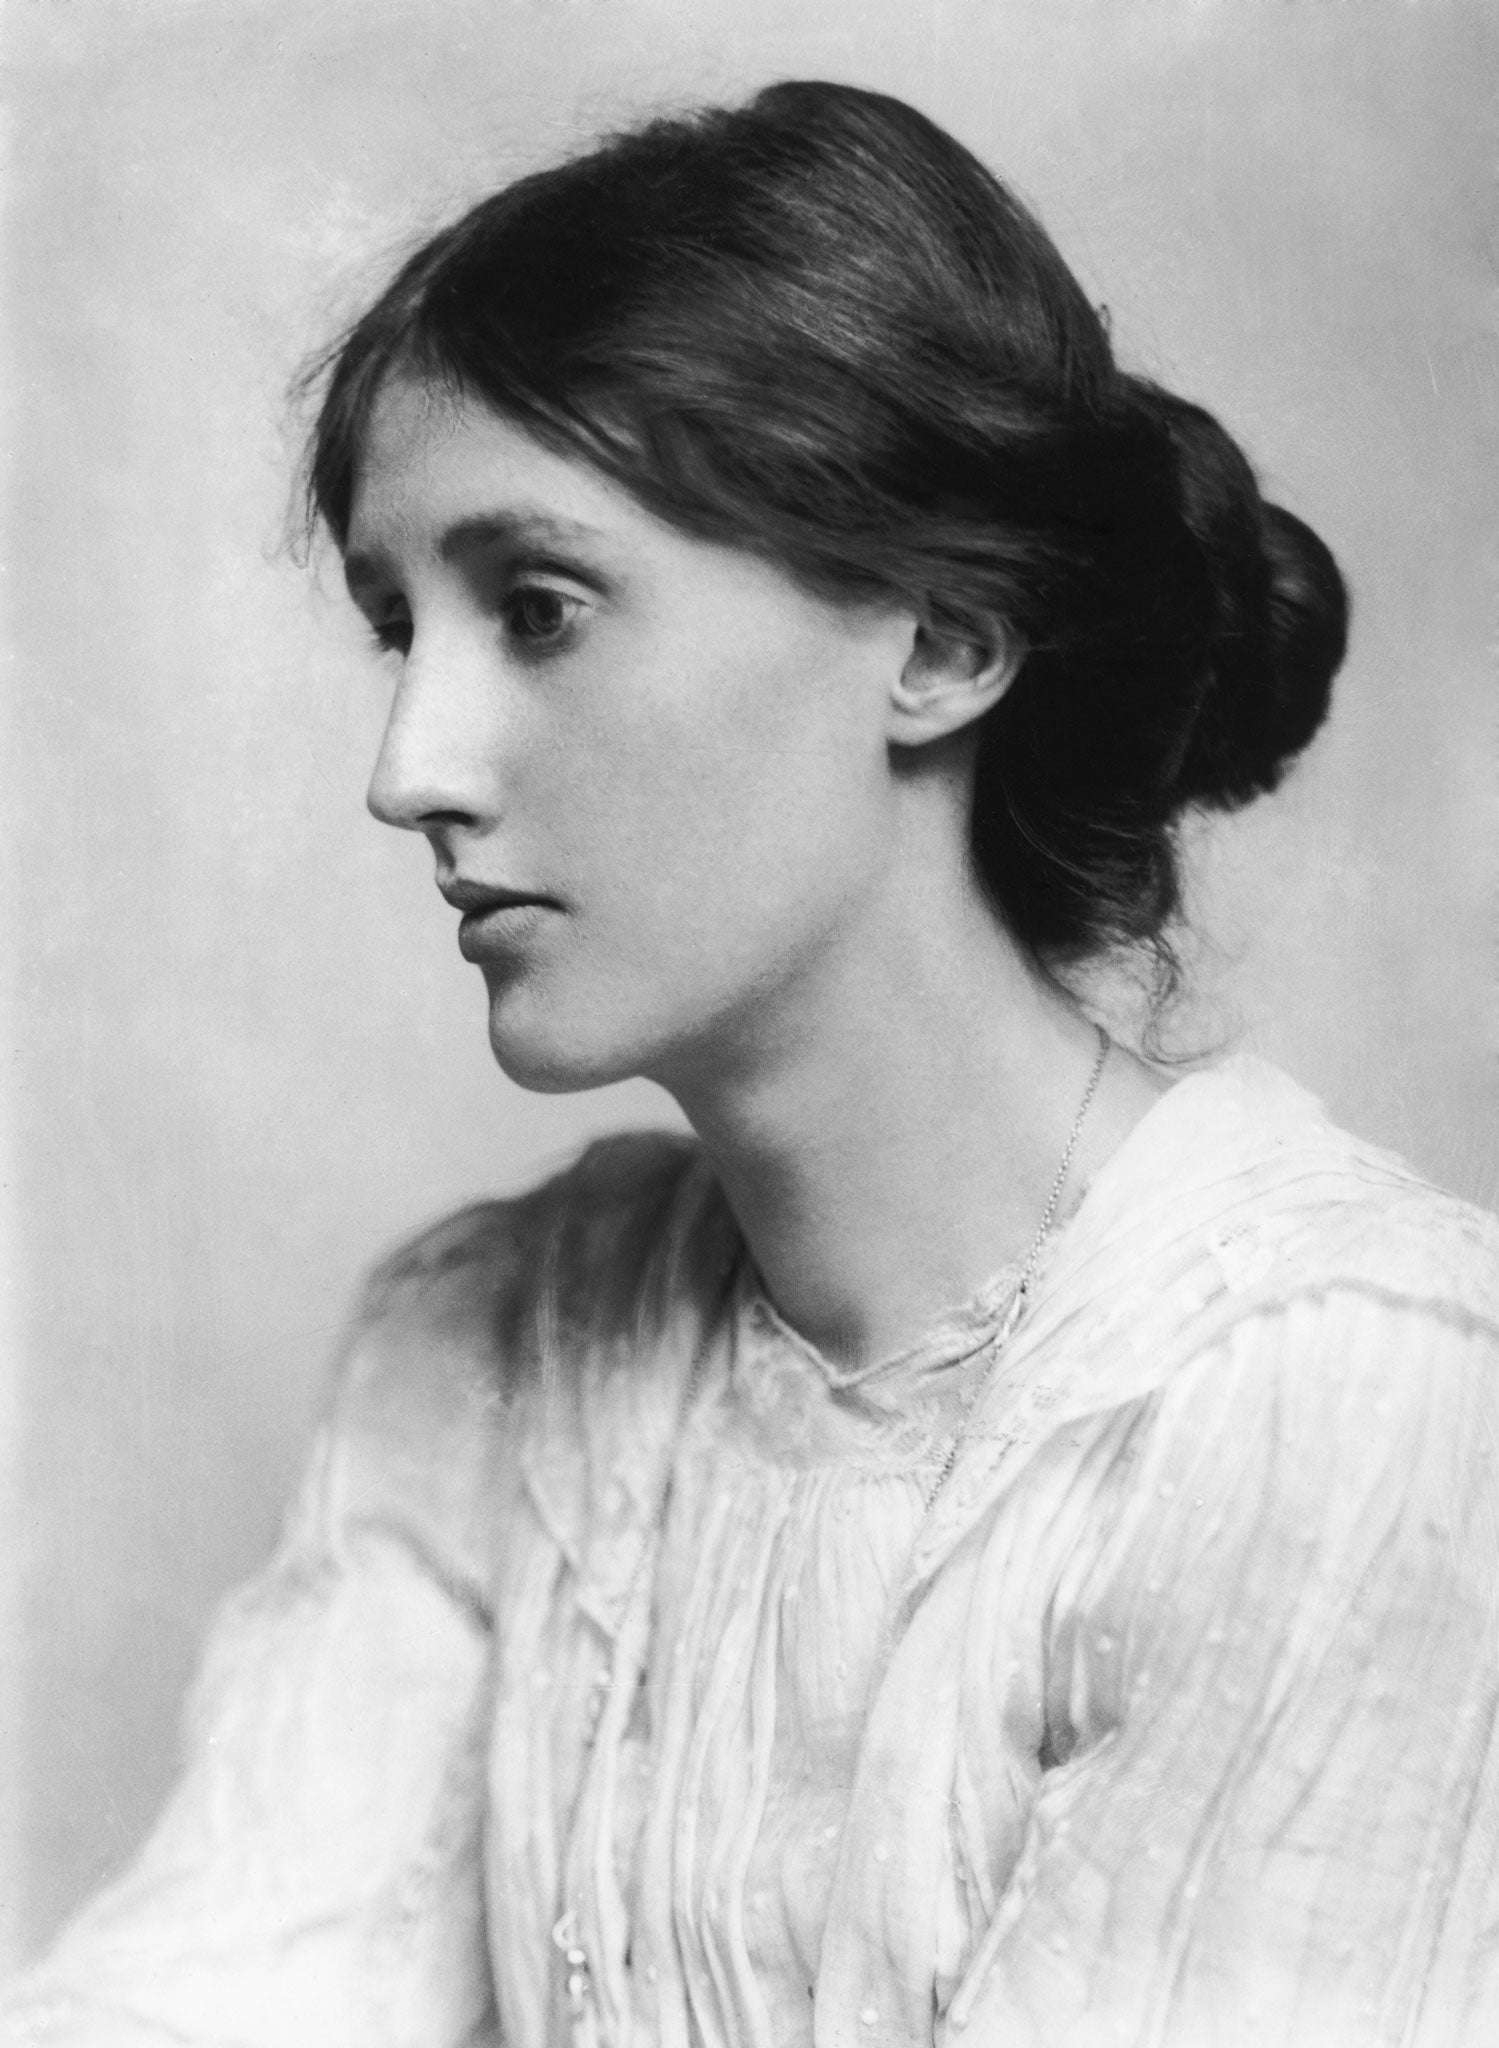 Virginia Woolf in 1902. She penned nine novels including Mrs Dalloway and the feminist tract A Room of One's Own, as well as biographies and criticism